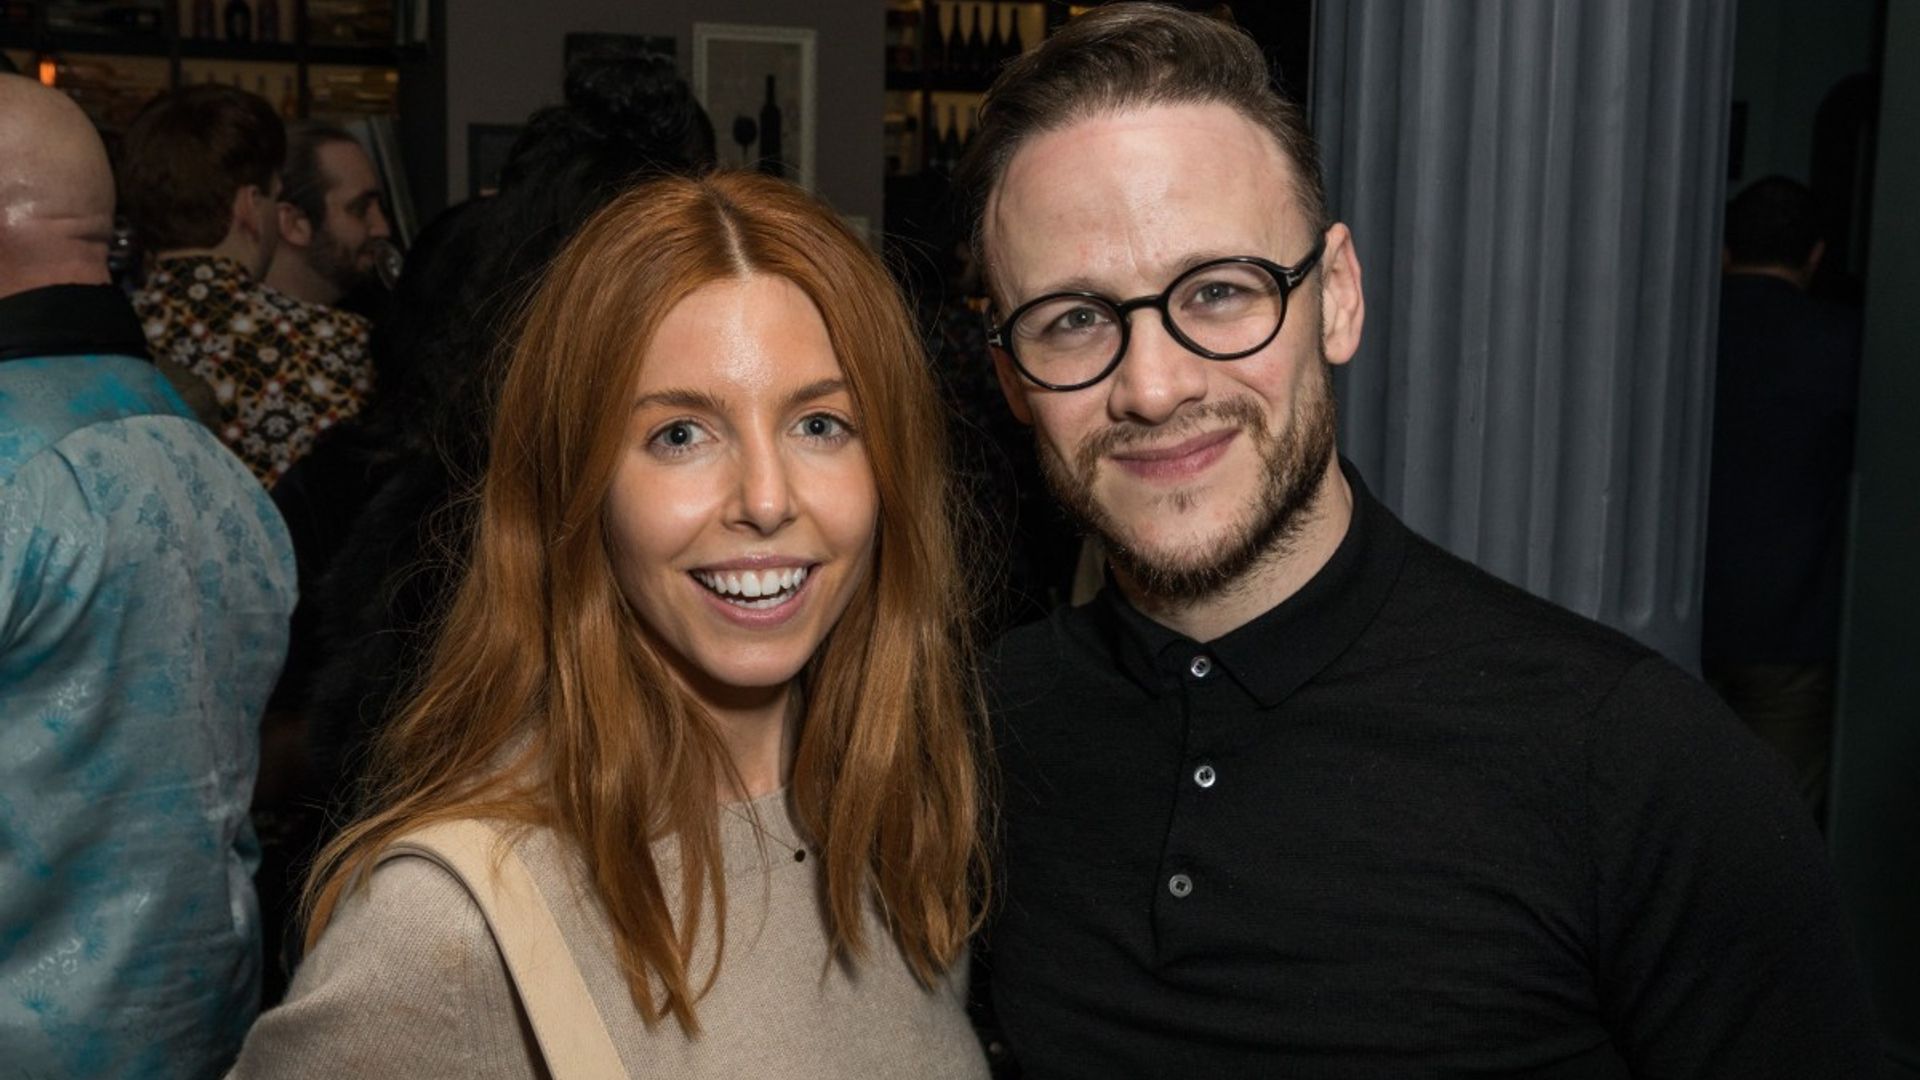 Strictly star Kevin Clifton shows public support for girlfriend Stacey Dooley